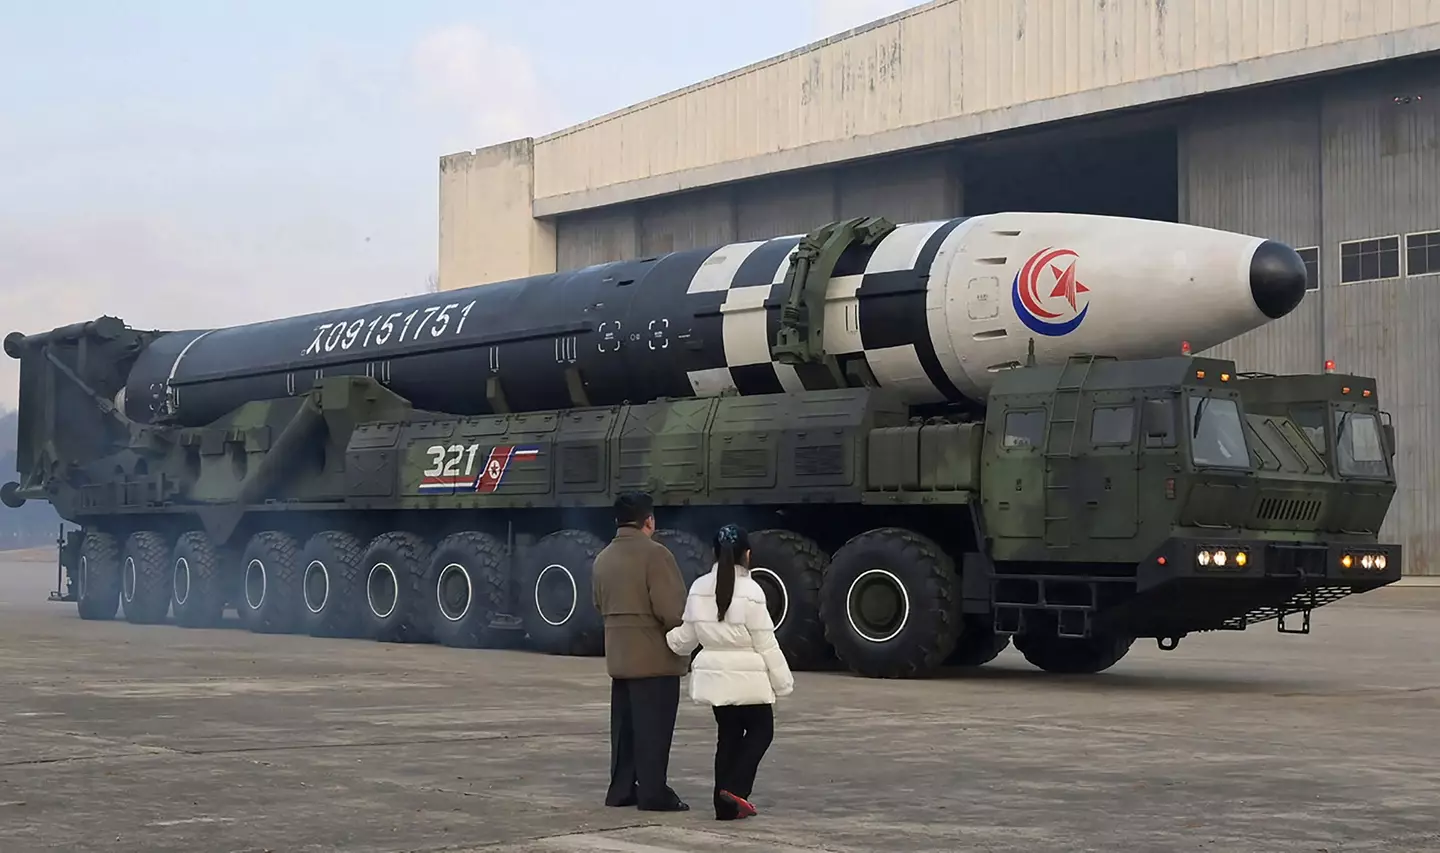 North Korean leader Kim Jong Un and Kim Ju-ae check out their enormous cache of missiles.